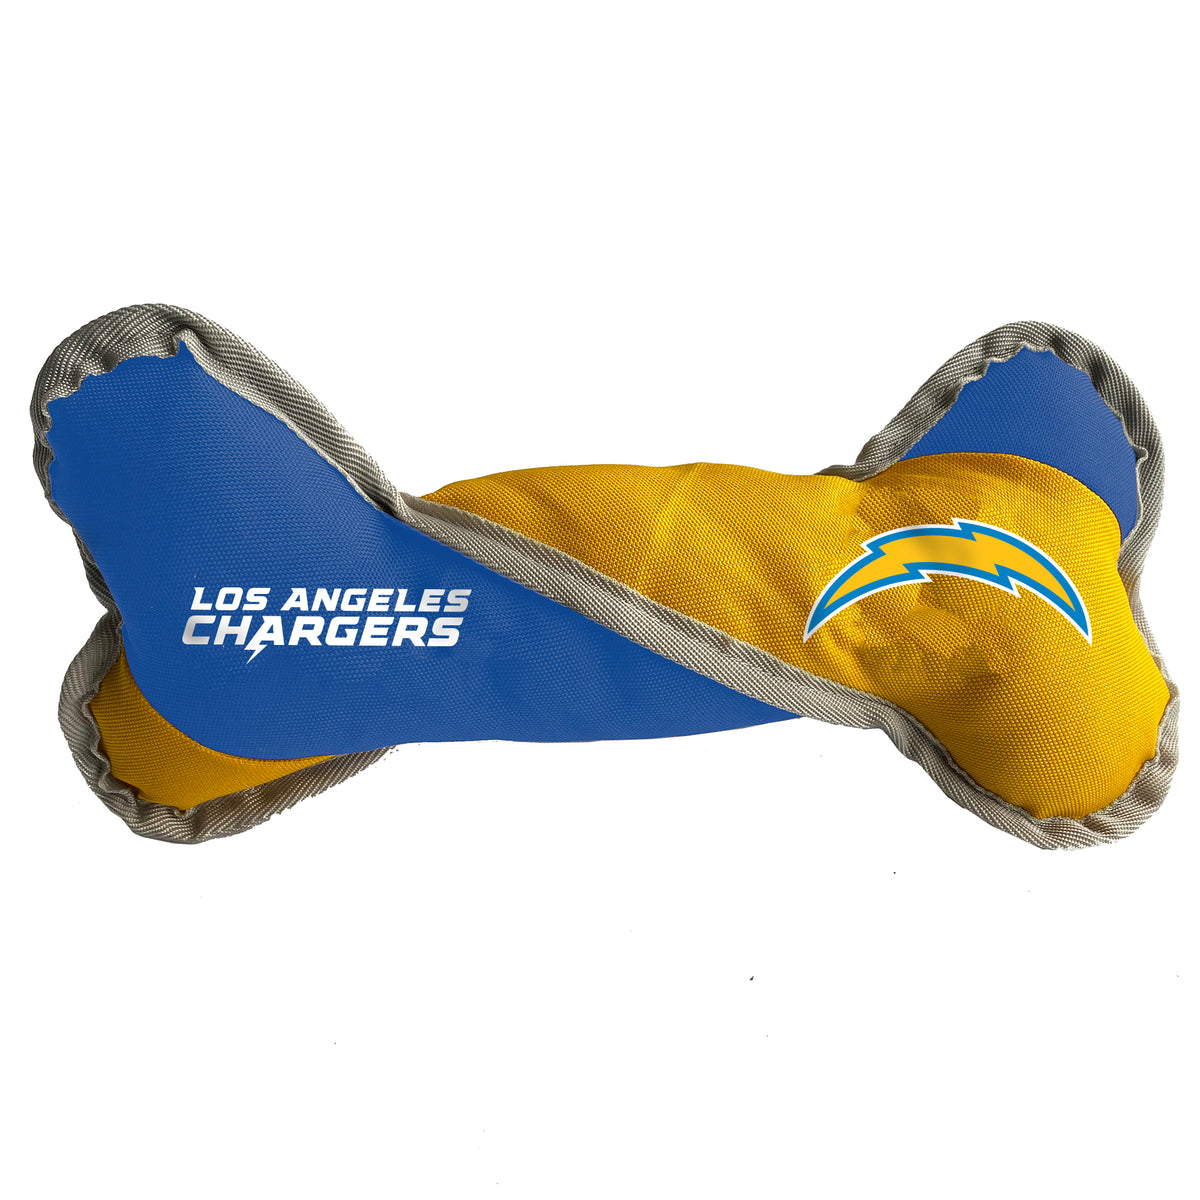 Los Angeles Chargers Pet Tug Bone - 3 Red Rovers